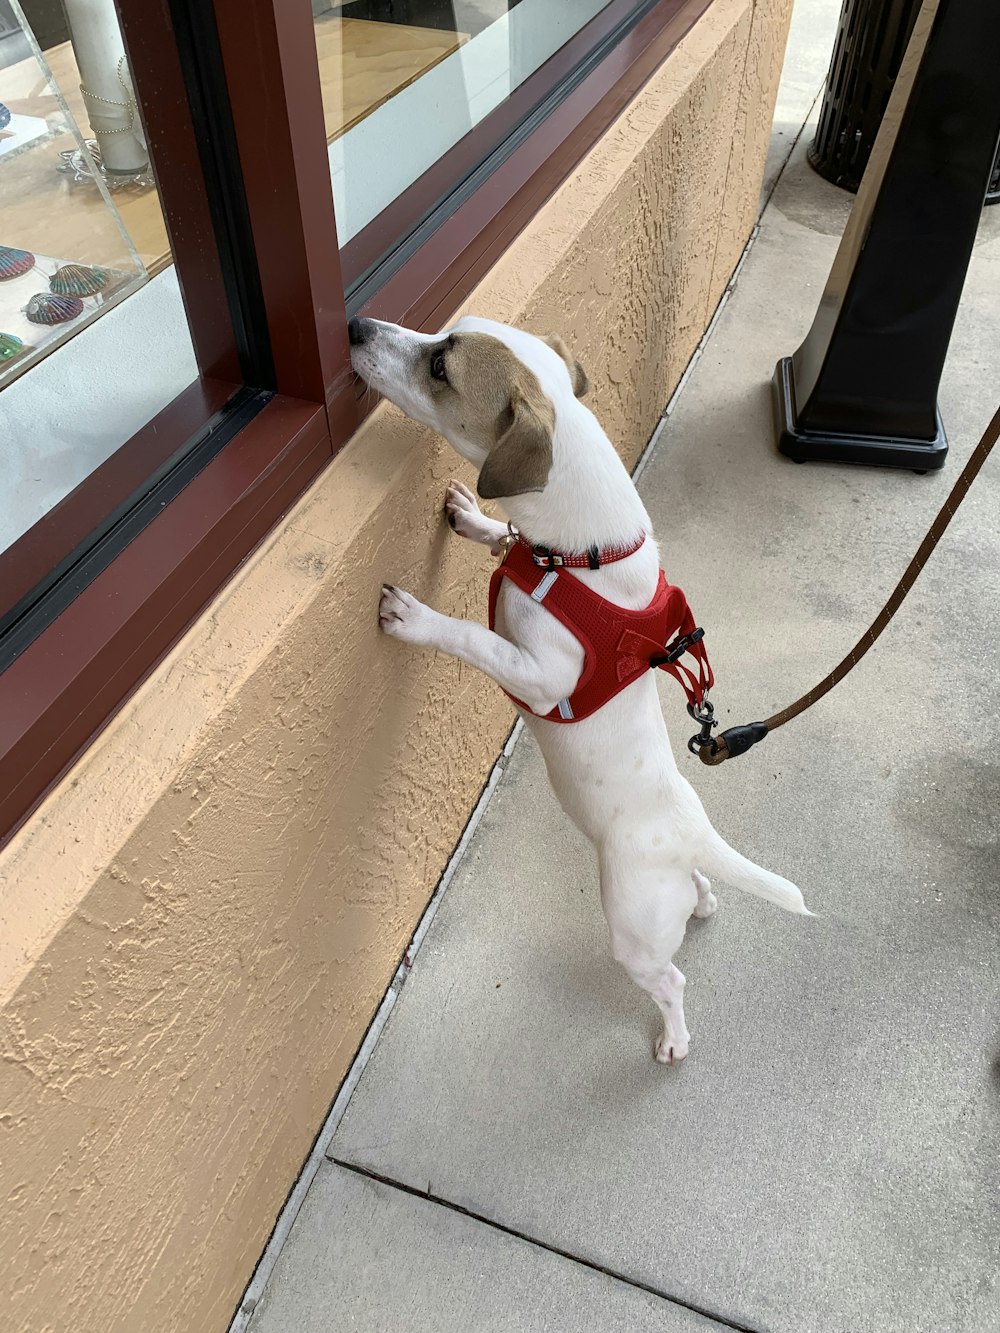 a white dog wearing a red harness is looking out a window